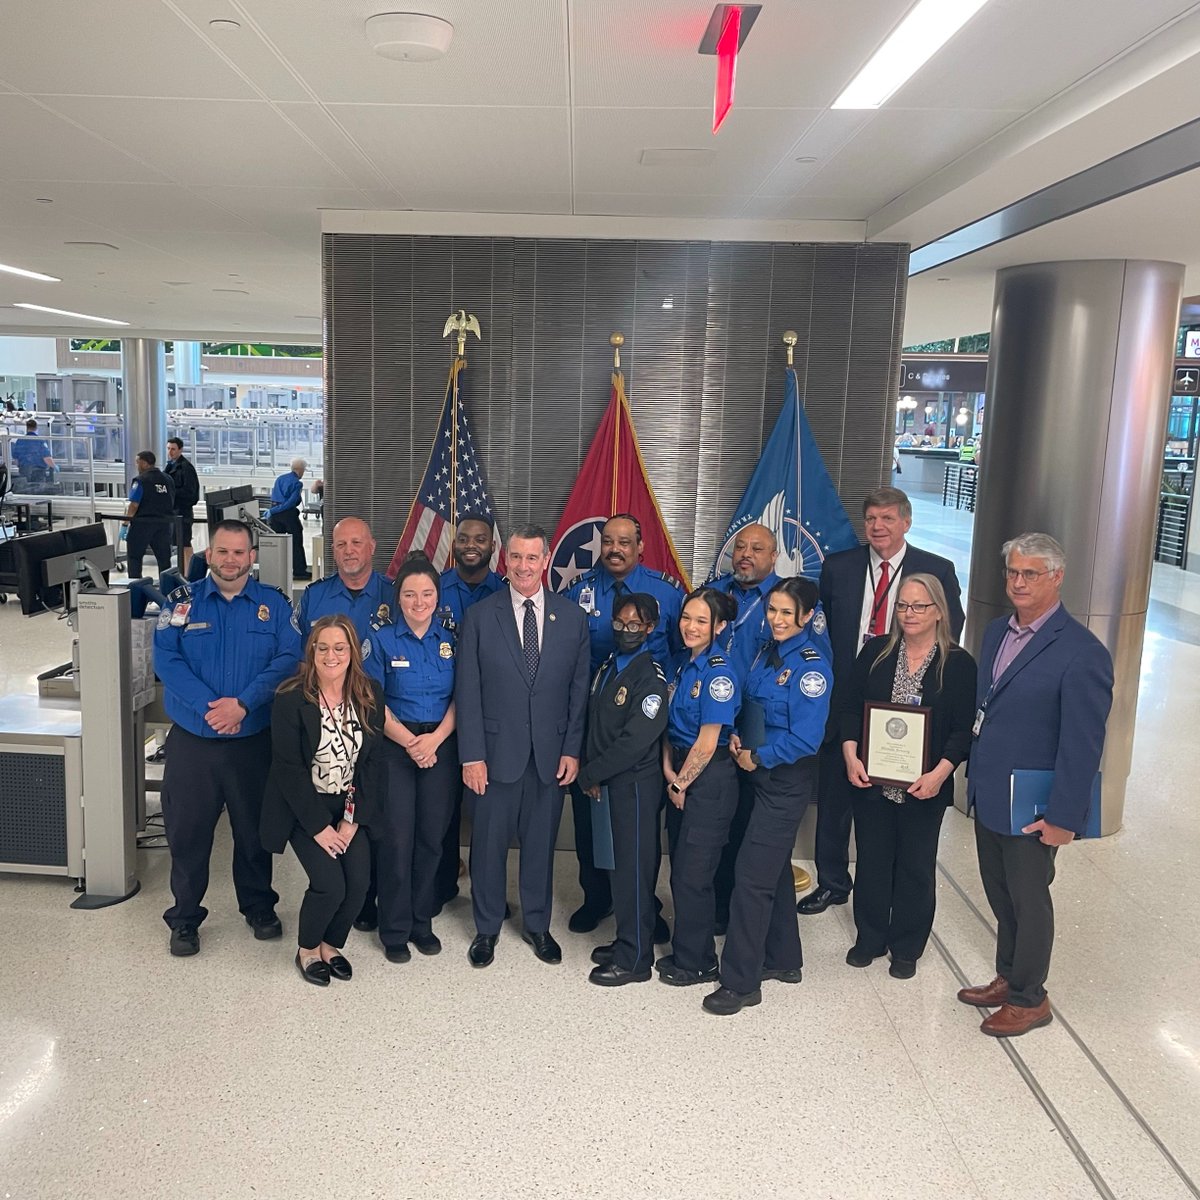 Our Transportation Security Officers are on the front lines of the aviation system every day, working tirelessly to keep the system secure. Their work never stops. What they do is admirable & to be commended. #PSRW #TSOTuesday